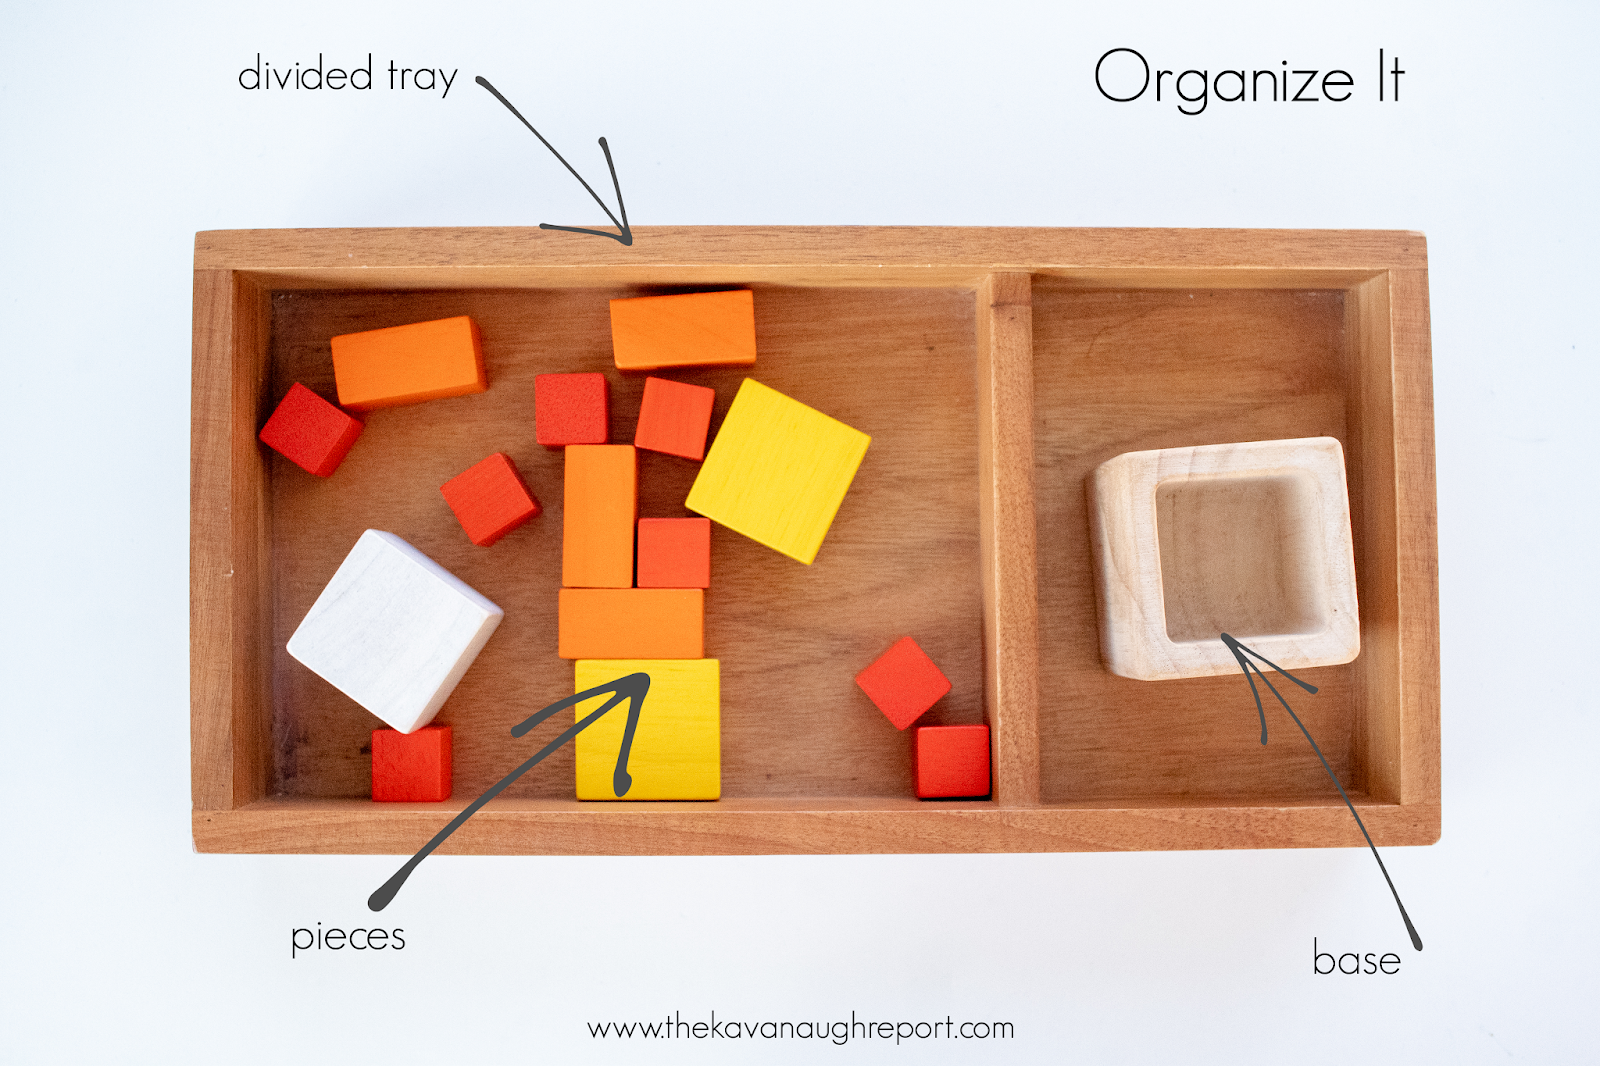 4 simple tips to present common toys and games in a Montessori way